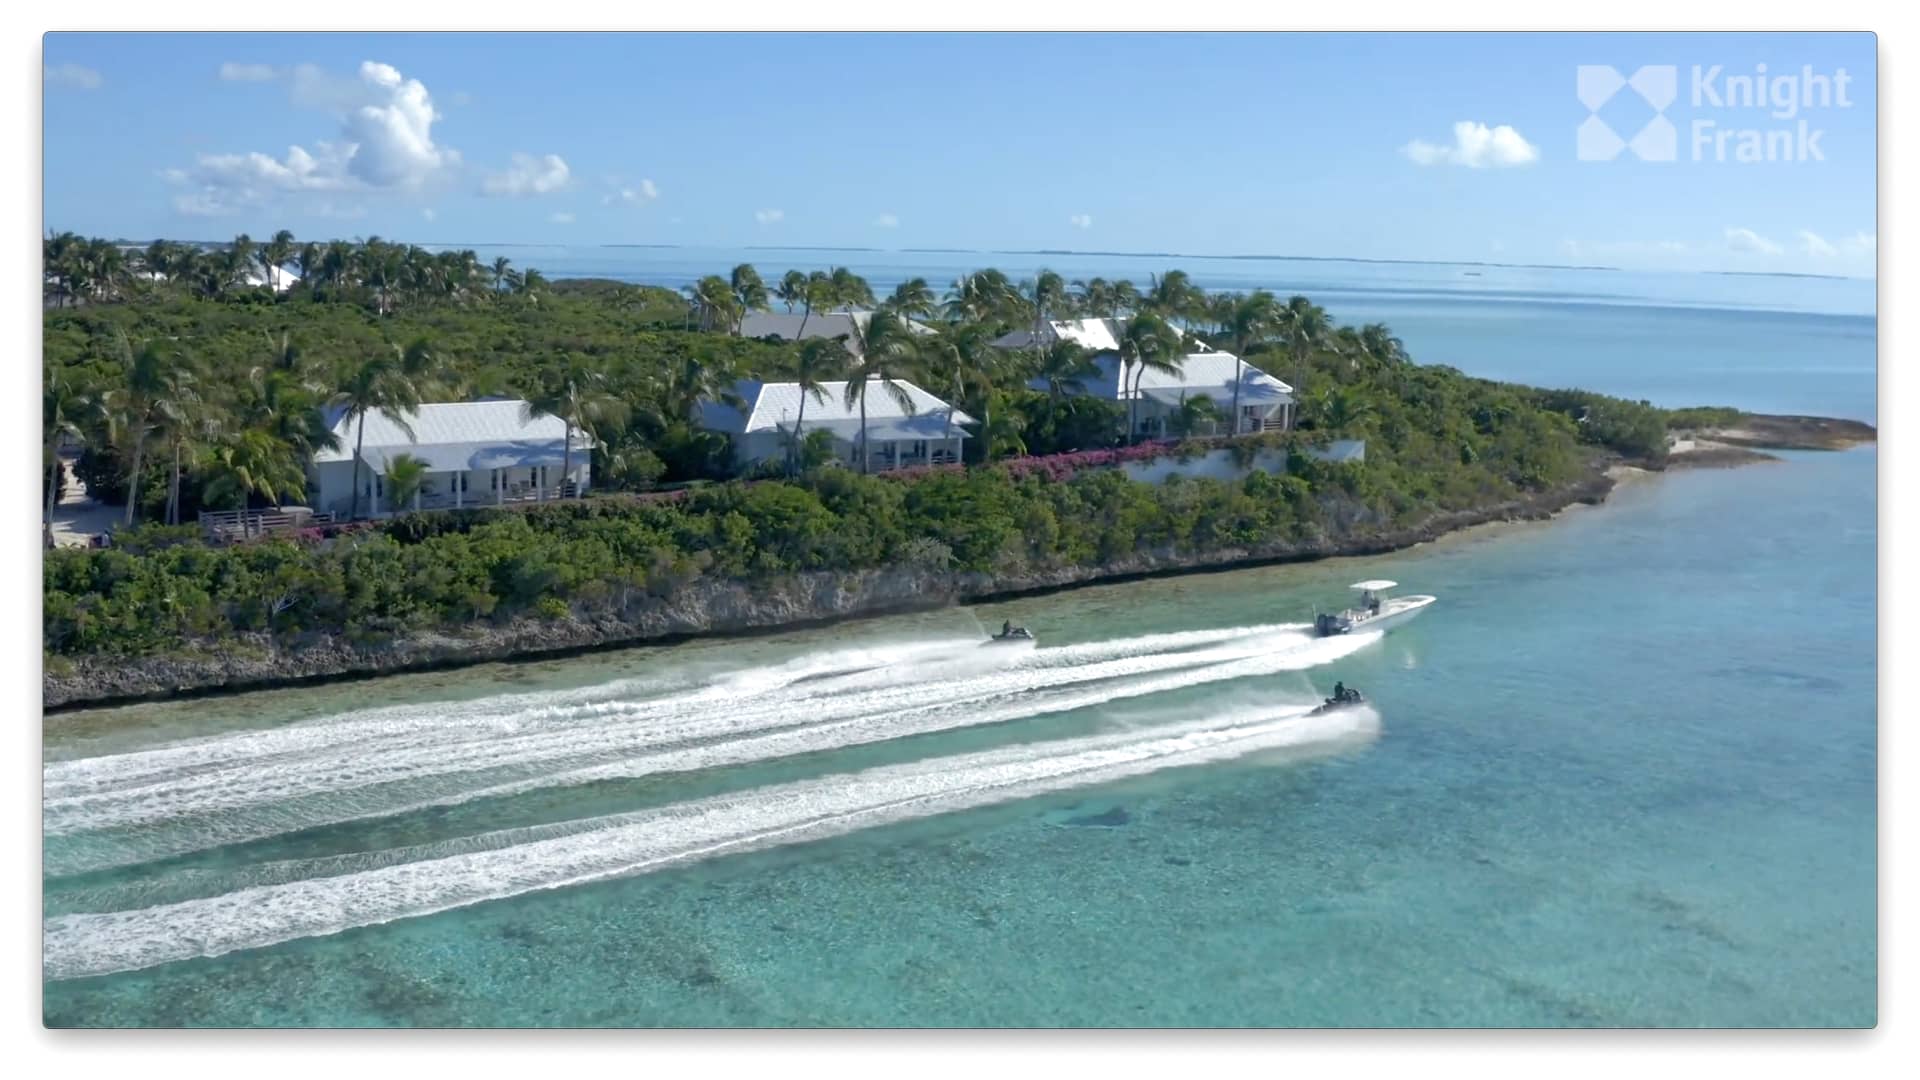 There are three waterfront villas for staff and guests on L'ile d'Anges.